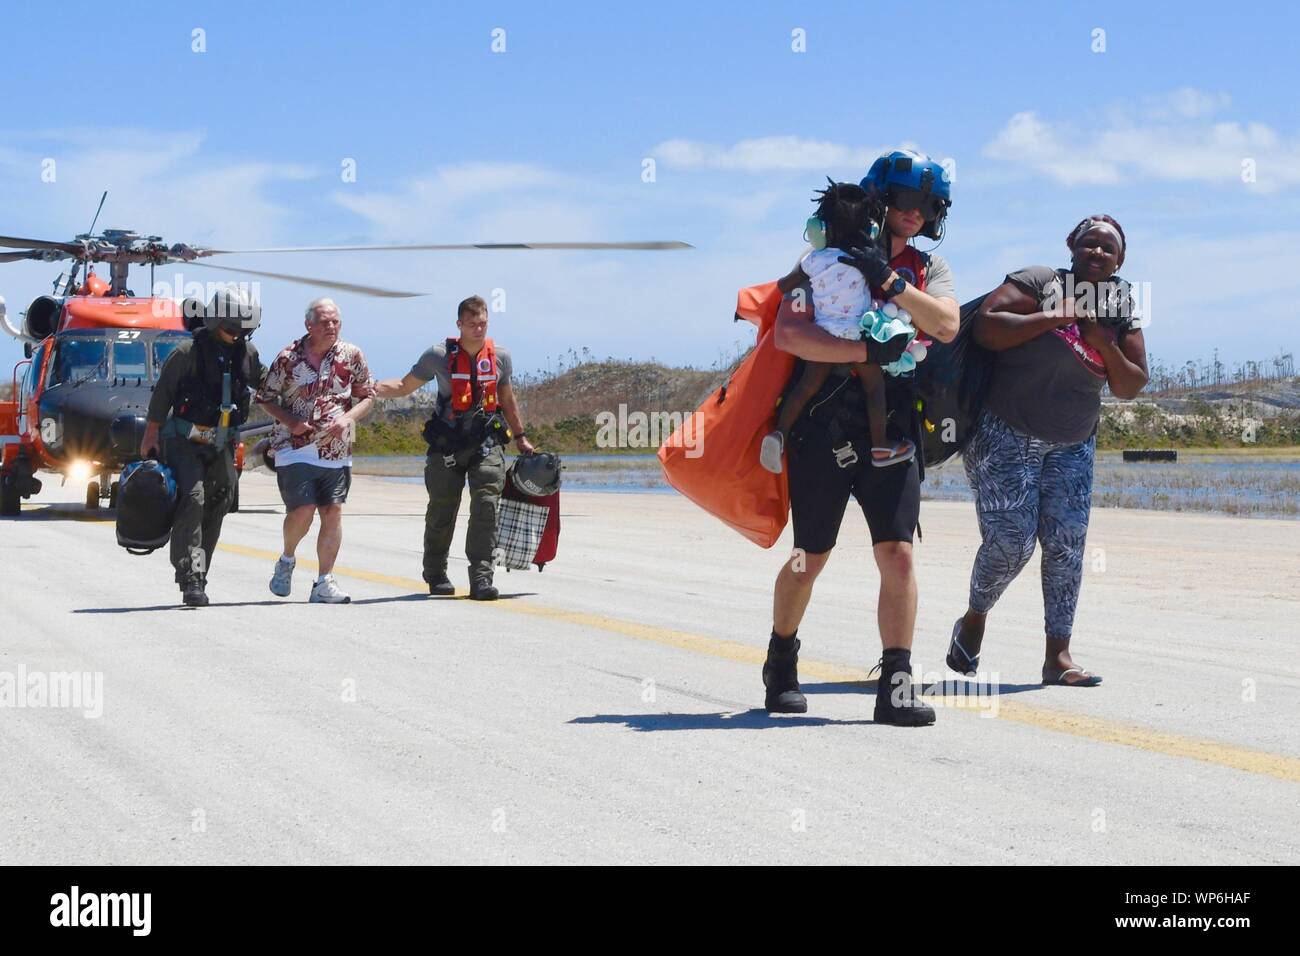 Marsh Harbour, Abaco, Bahamas. 07 September, 2019. U.S. Coast Guard members assist in evacuating survivors in the aftermath of Hurricane Dorian September 7, 2019 in Marsh Harbour, Abaco, Bahamas. Dorian struck the small island nation as a Category 5 storm with winds of 185 mph. Stock Photo